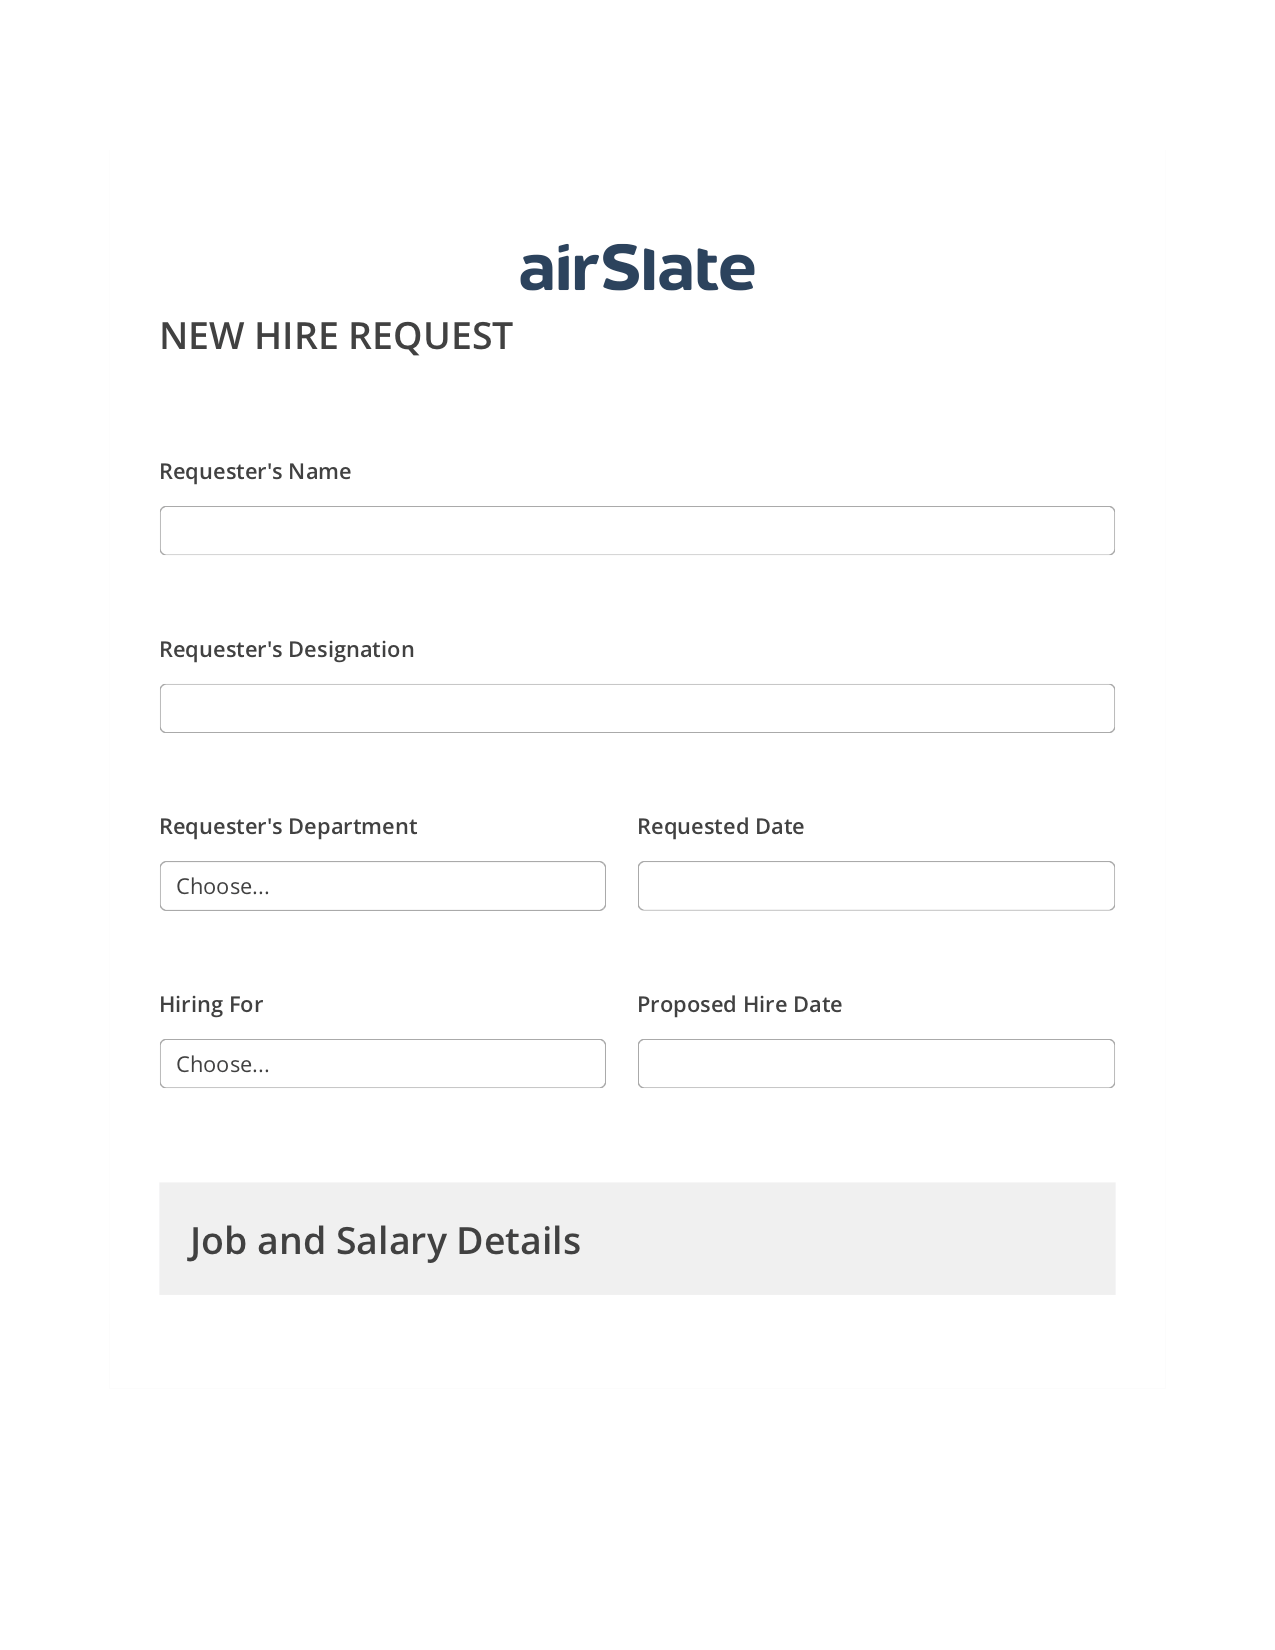 Hiring Request Flow Pre-fill Dropdown from Airtable